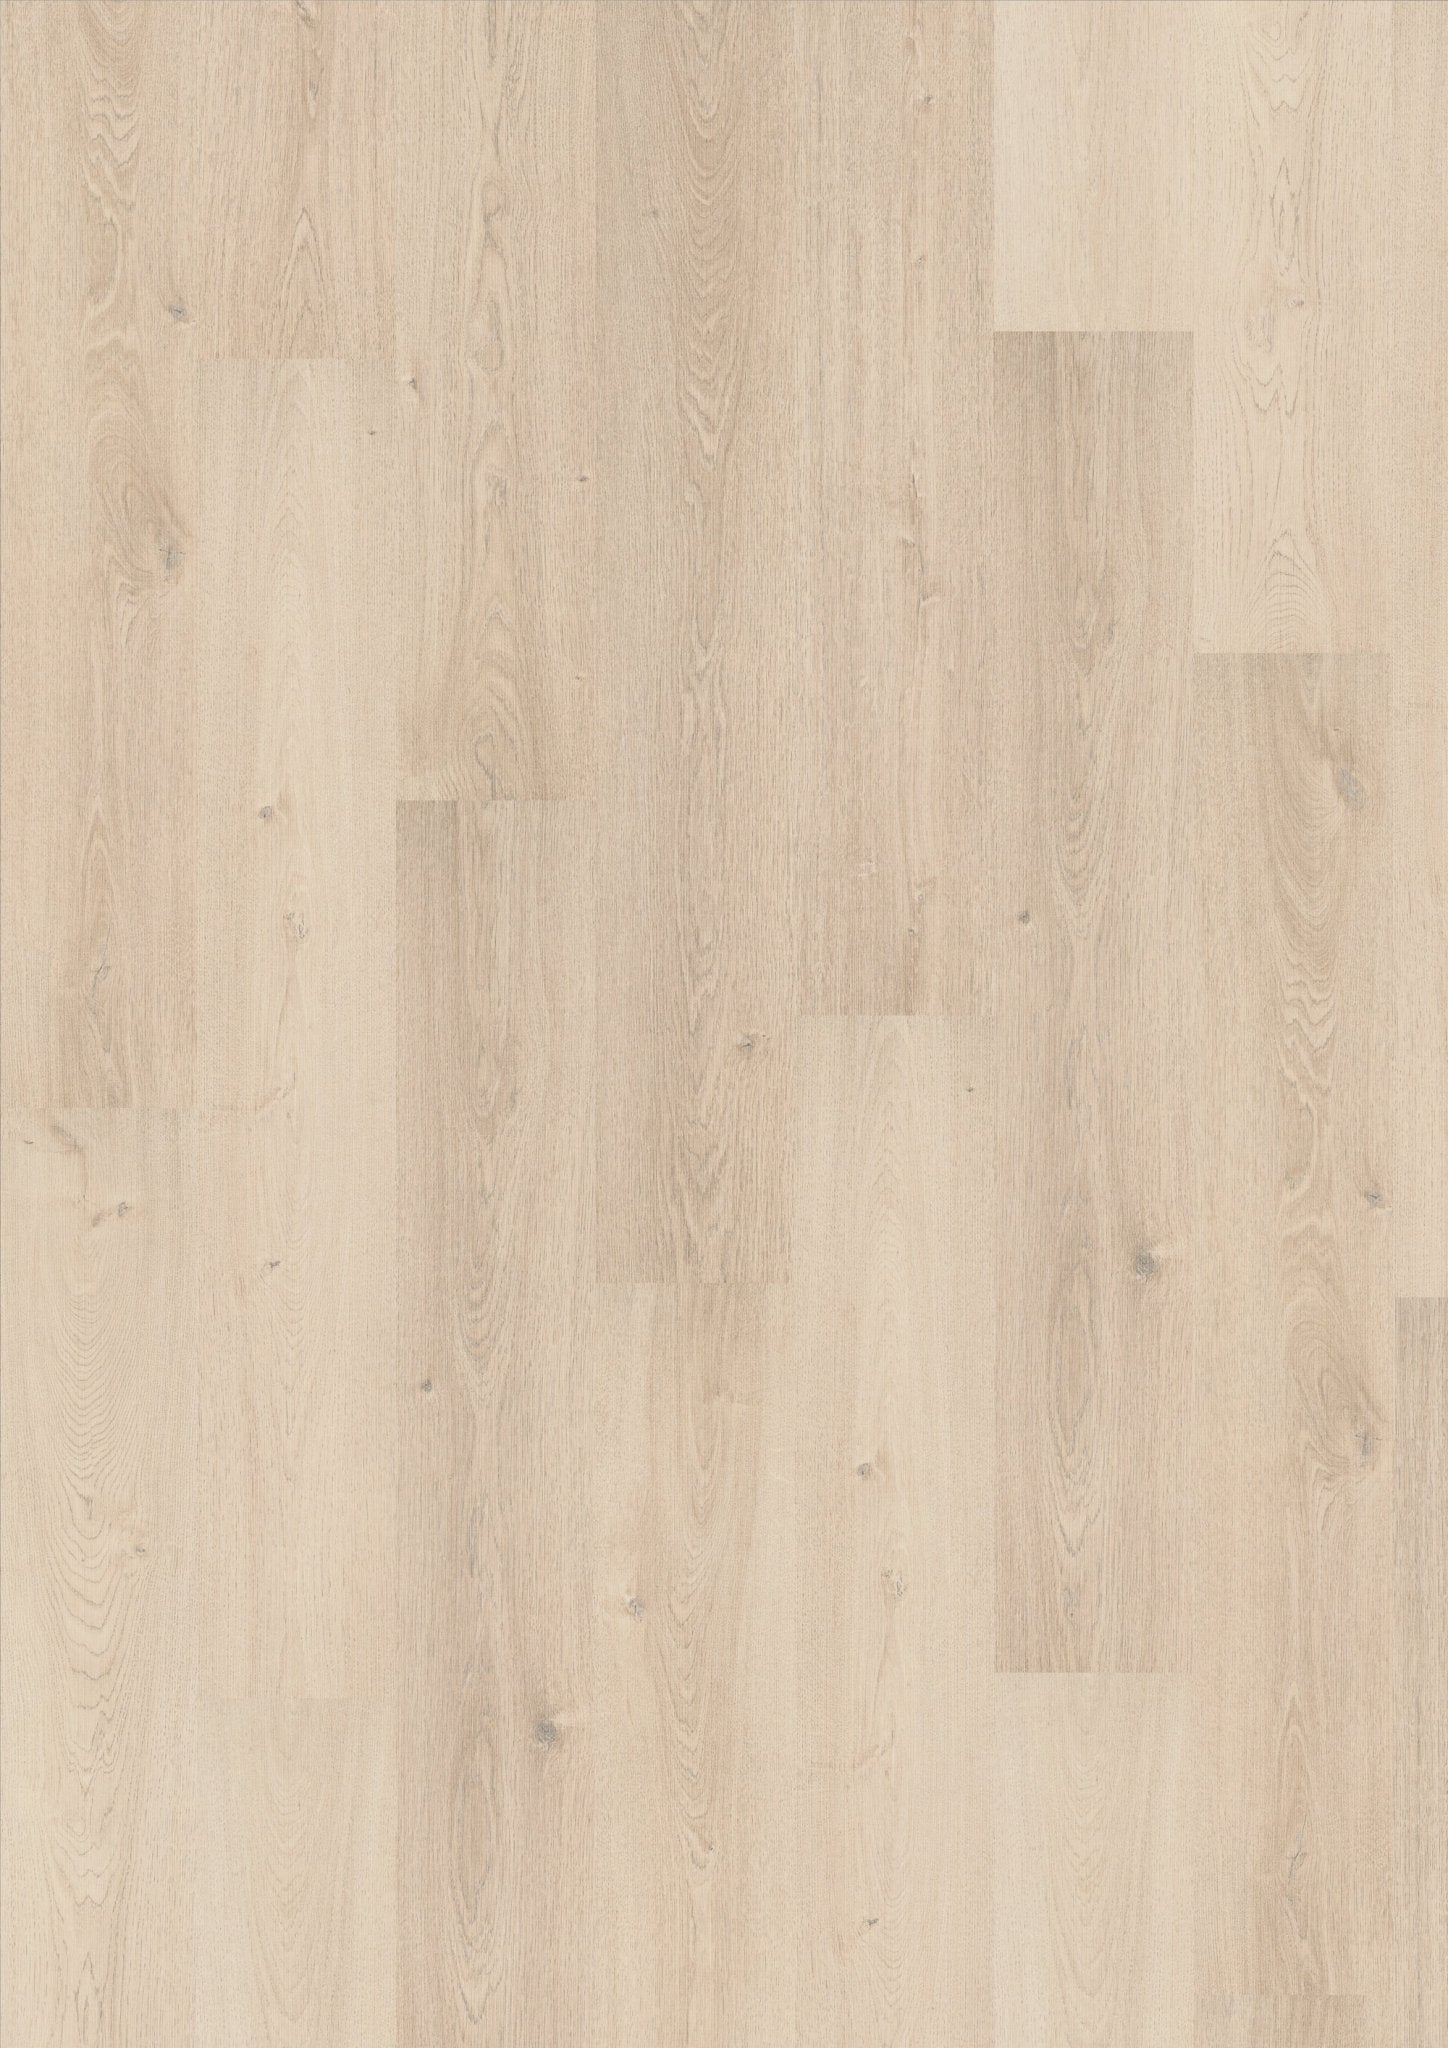 JOKA Deluxe CITY V4 431 ND NormalDiele Laminatboden mit "DUO-Connect+"-System Oak Imperial Laminat